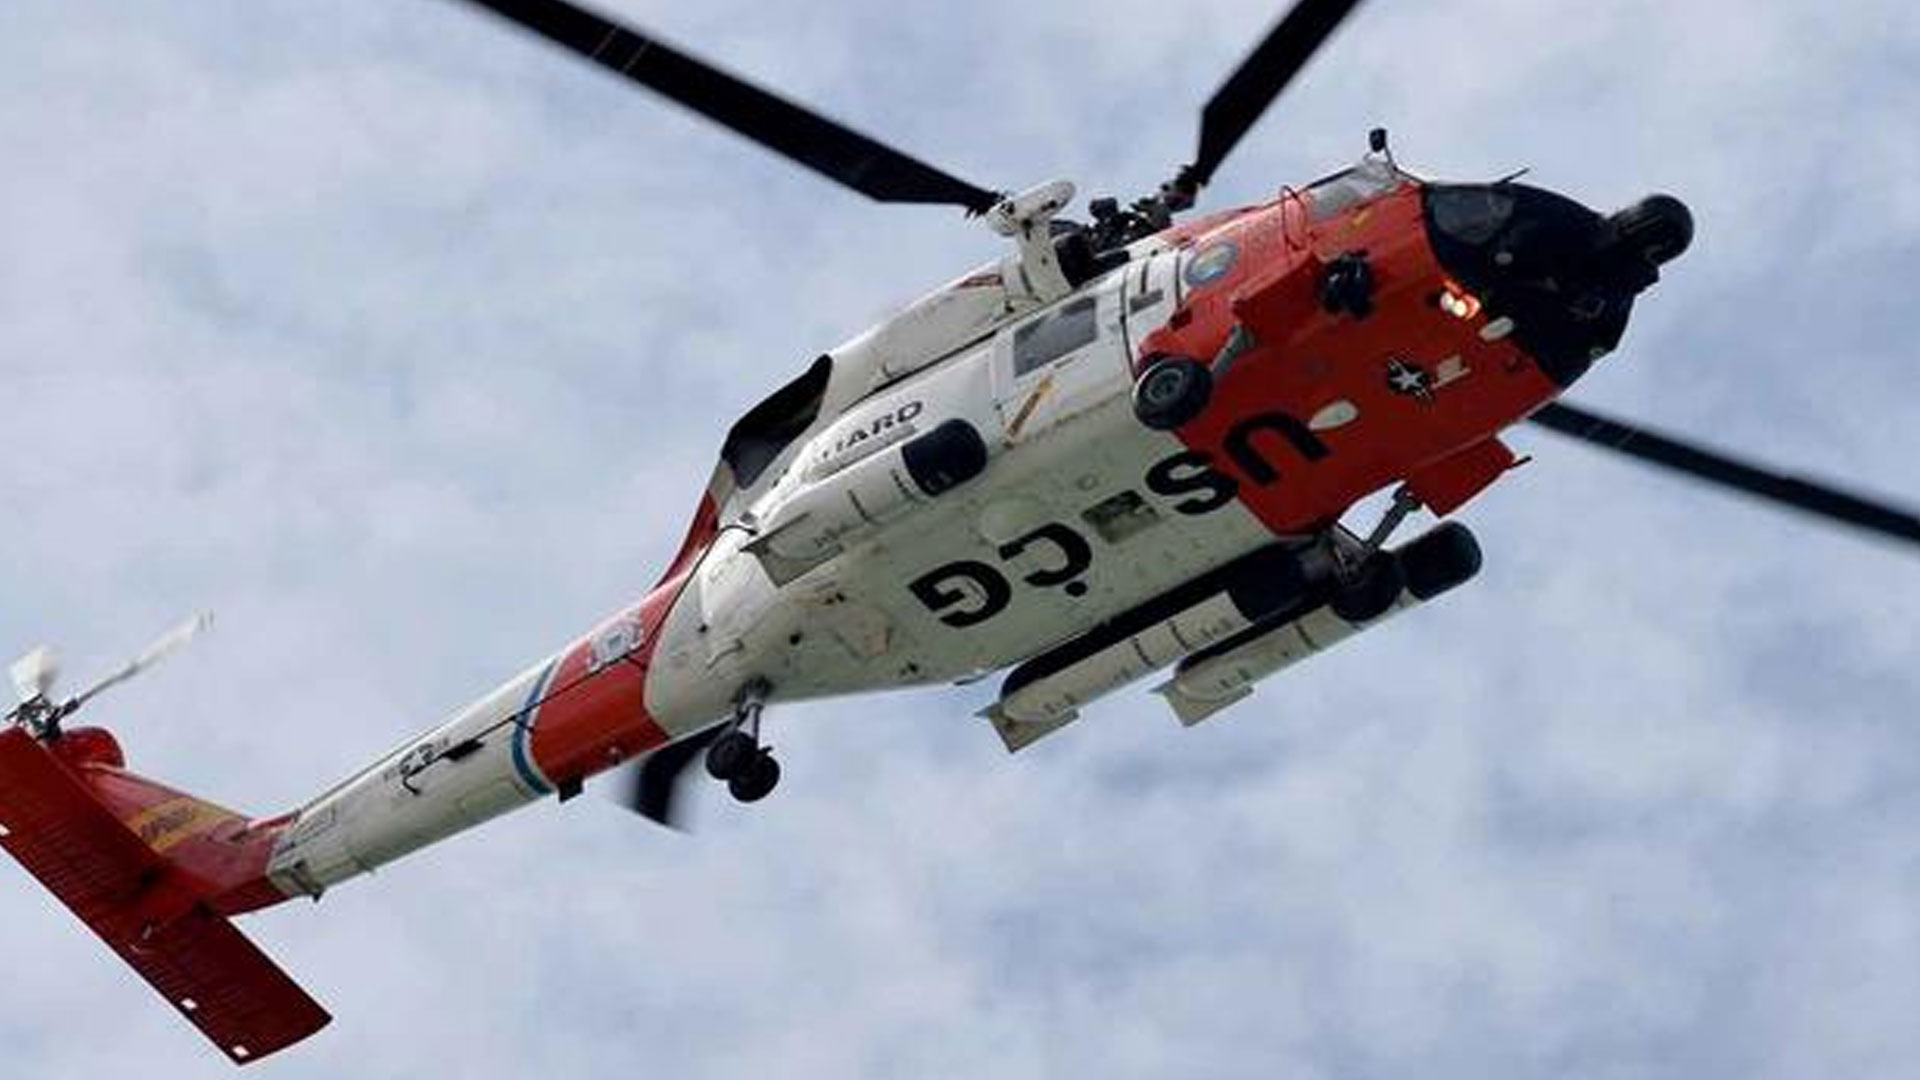 Coast Guard Helicopter Crash: Two Members Seriously Injured during Search and Rescue Mission...